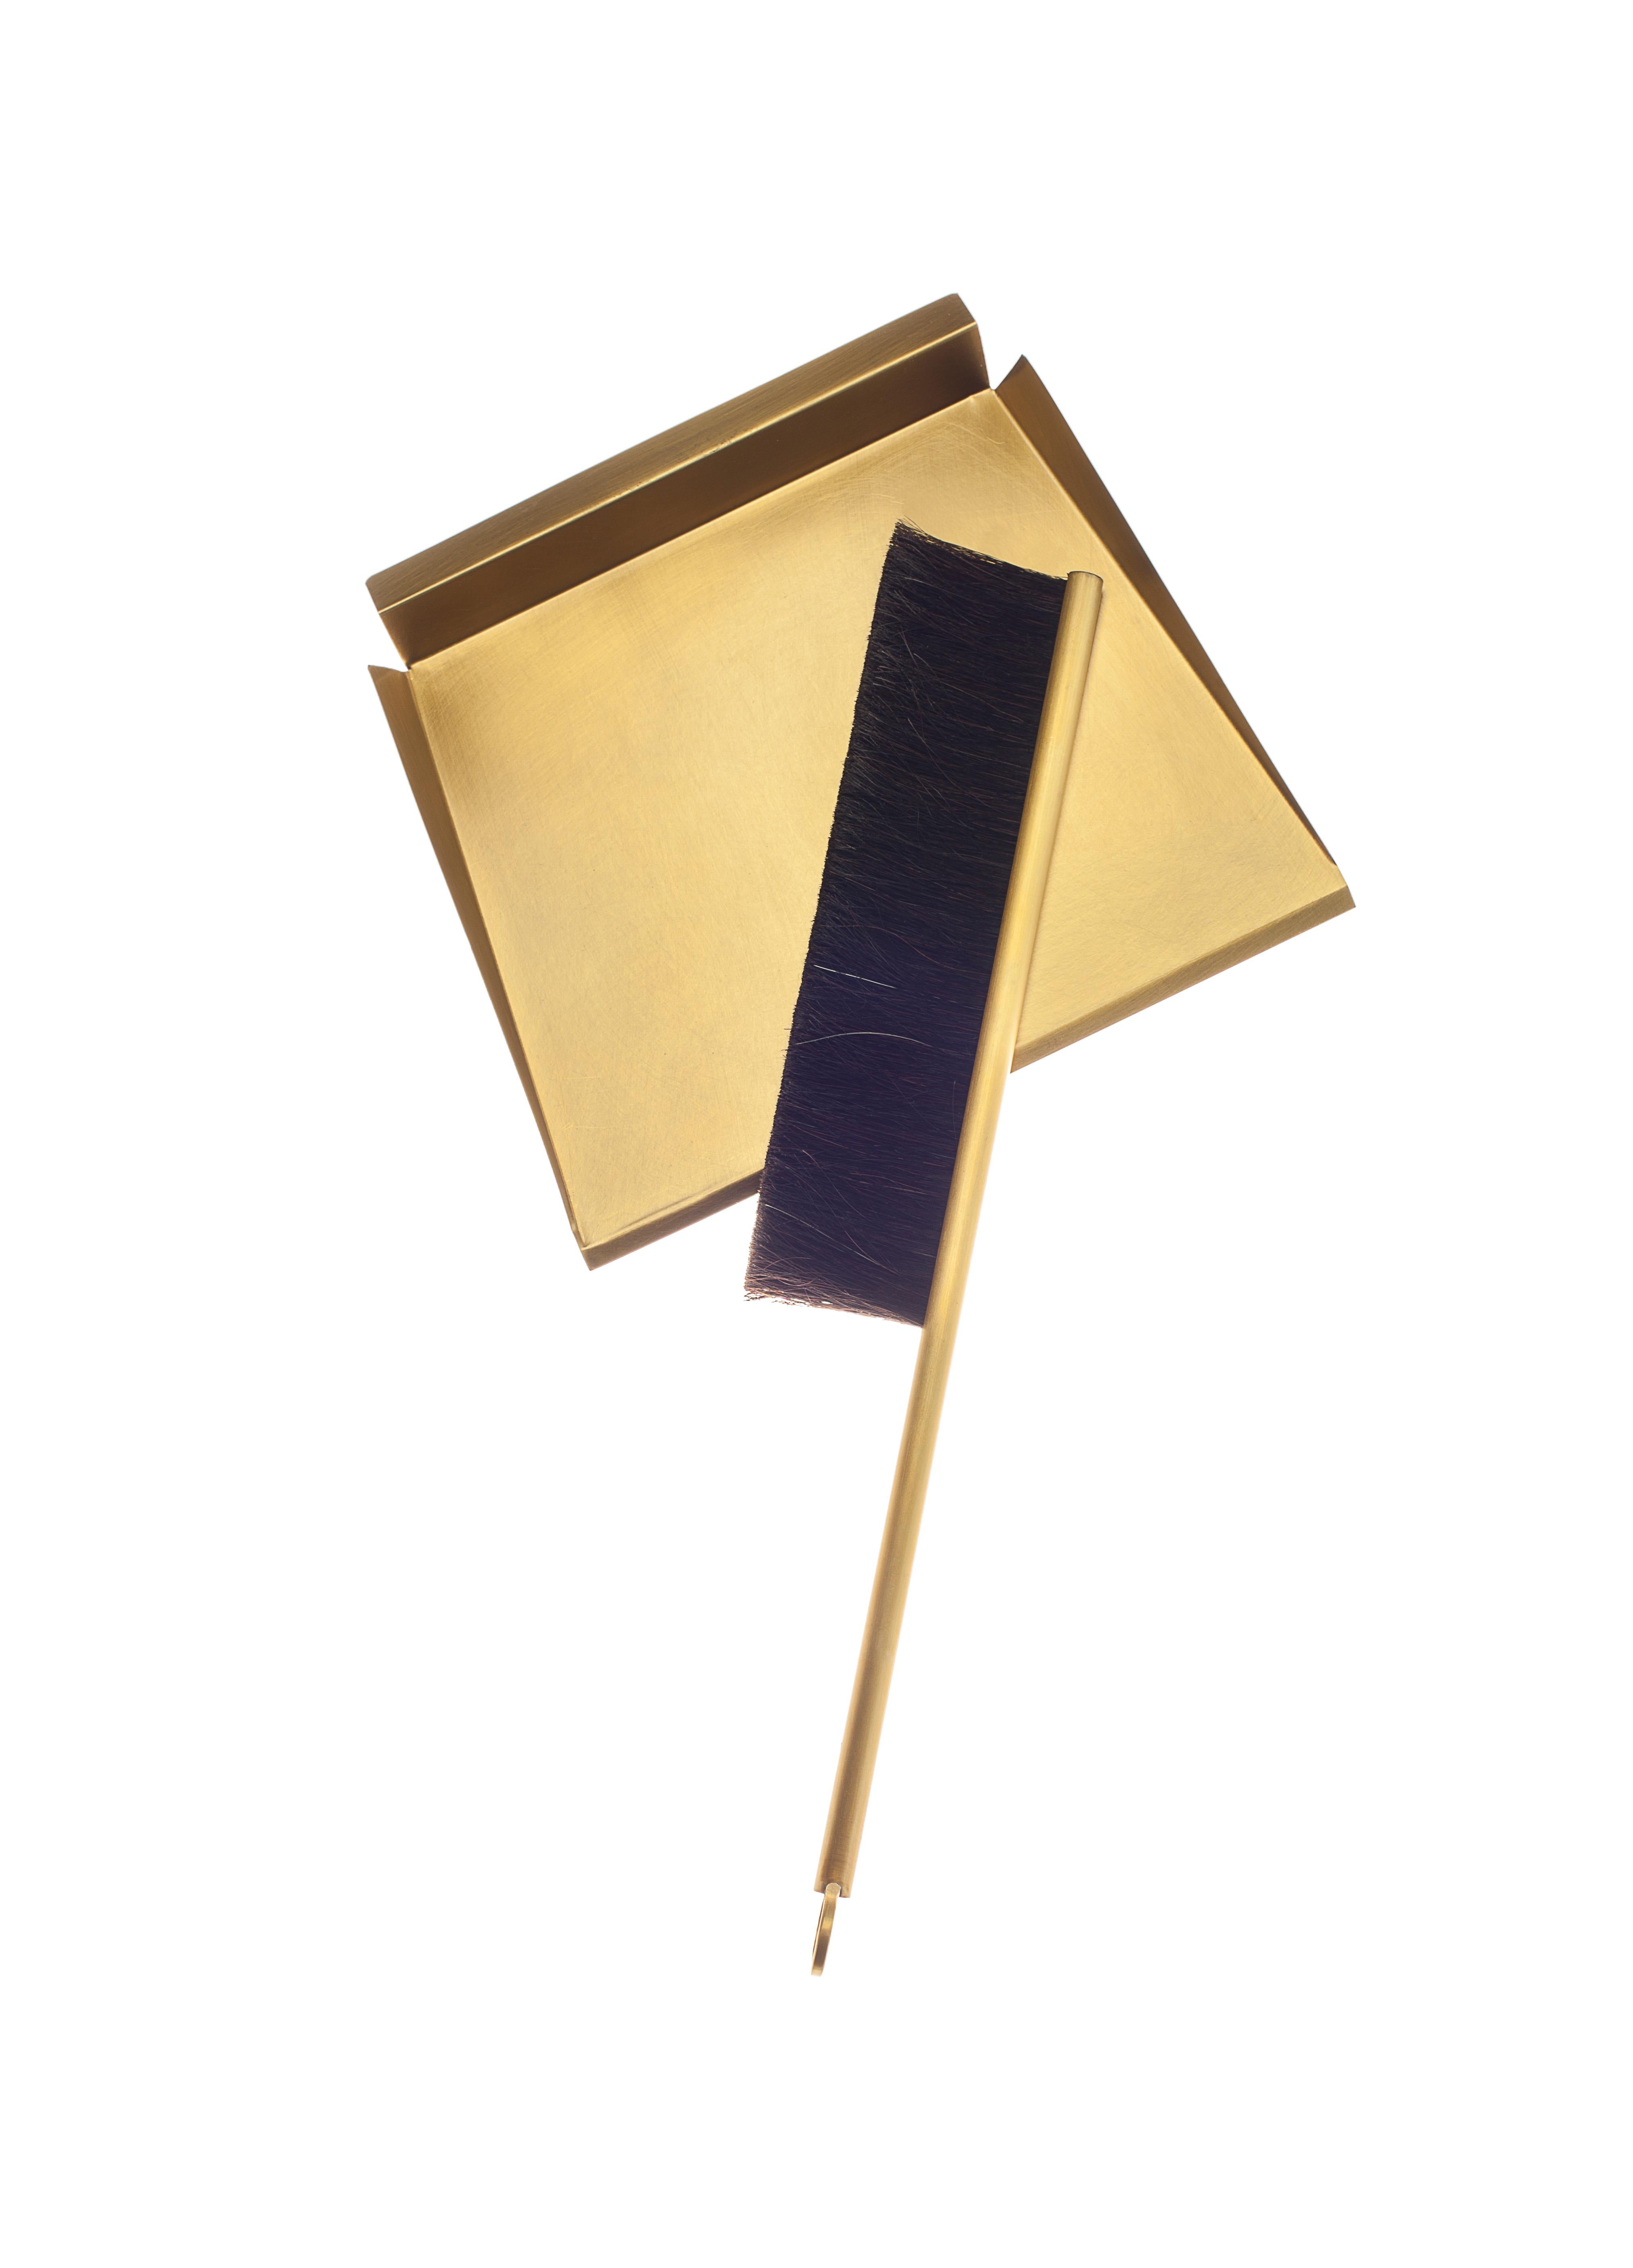 Brass Sweep dustpan and brush by Gentner Design
Dimensions: D 20 x W 18 x H 6.3 cm
Materials: tarnished brass, horsehair

This dust pan and brush bring a whole new dimension to cleaning. Made of brass and horsehair, the set comes with a magnetic peg